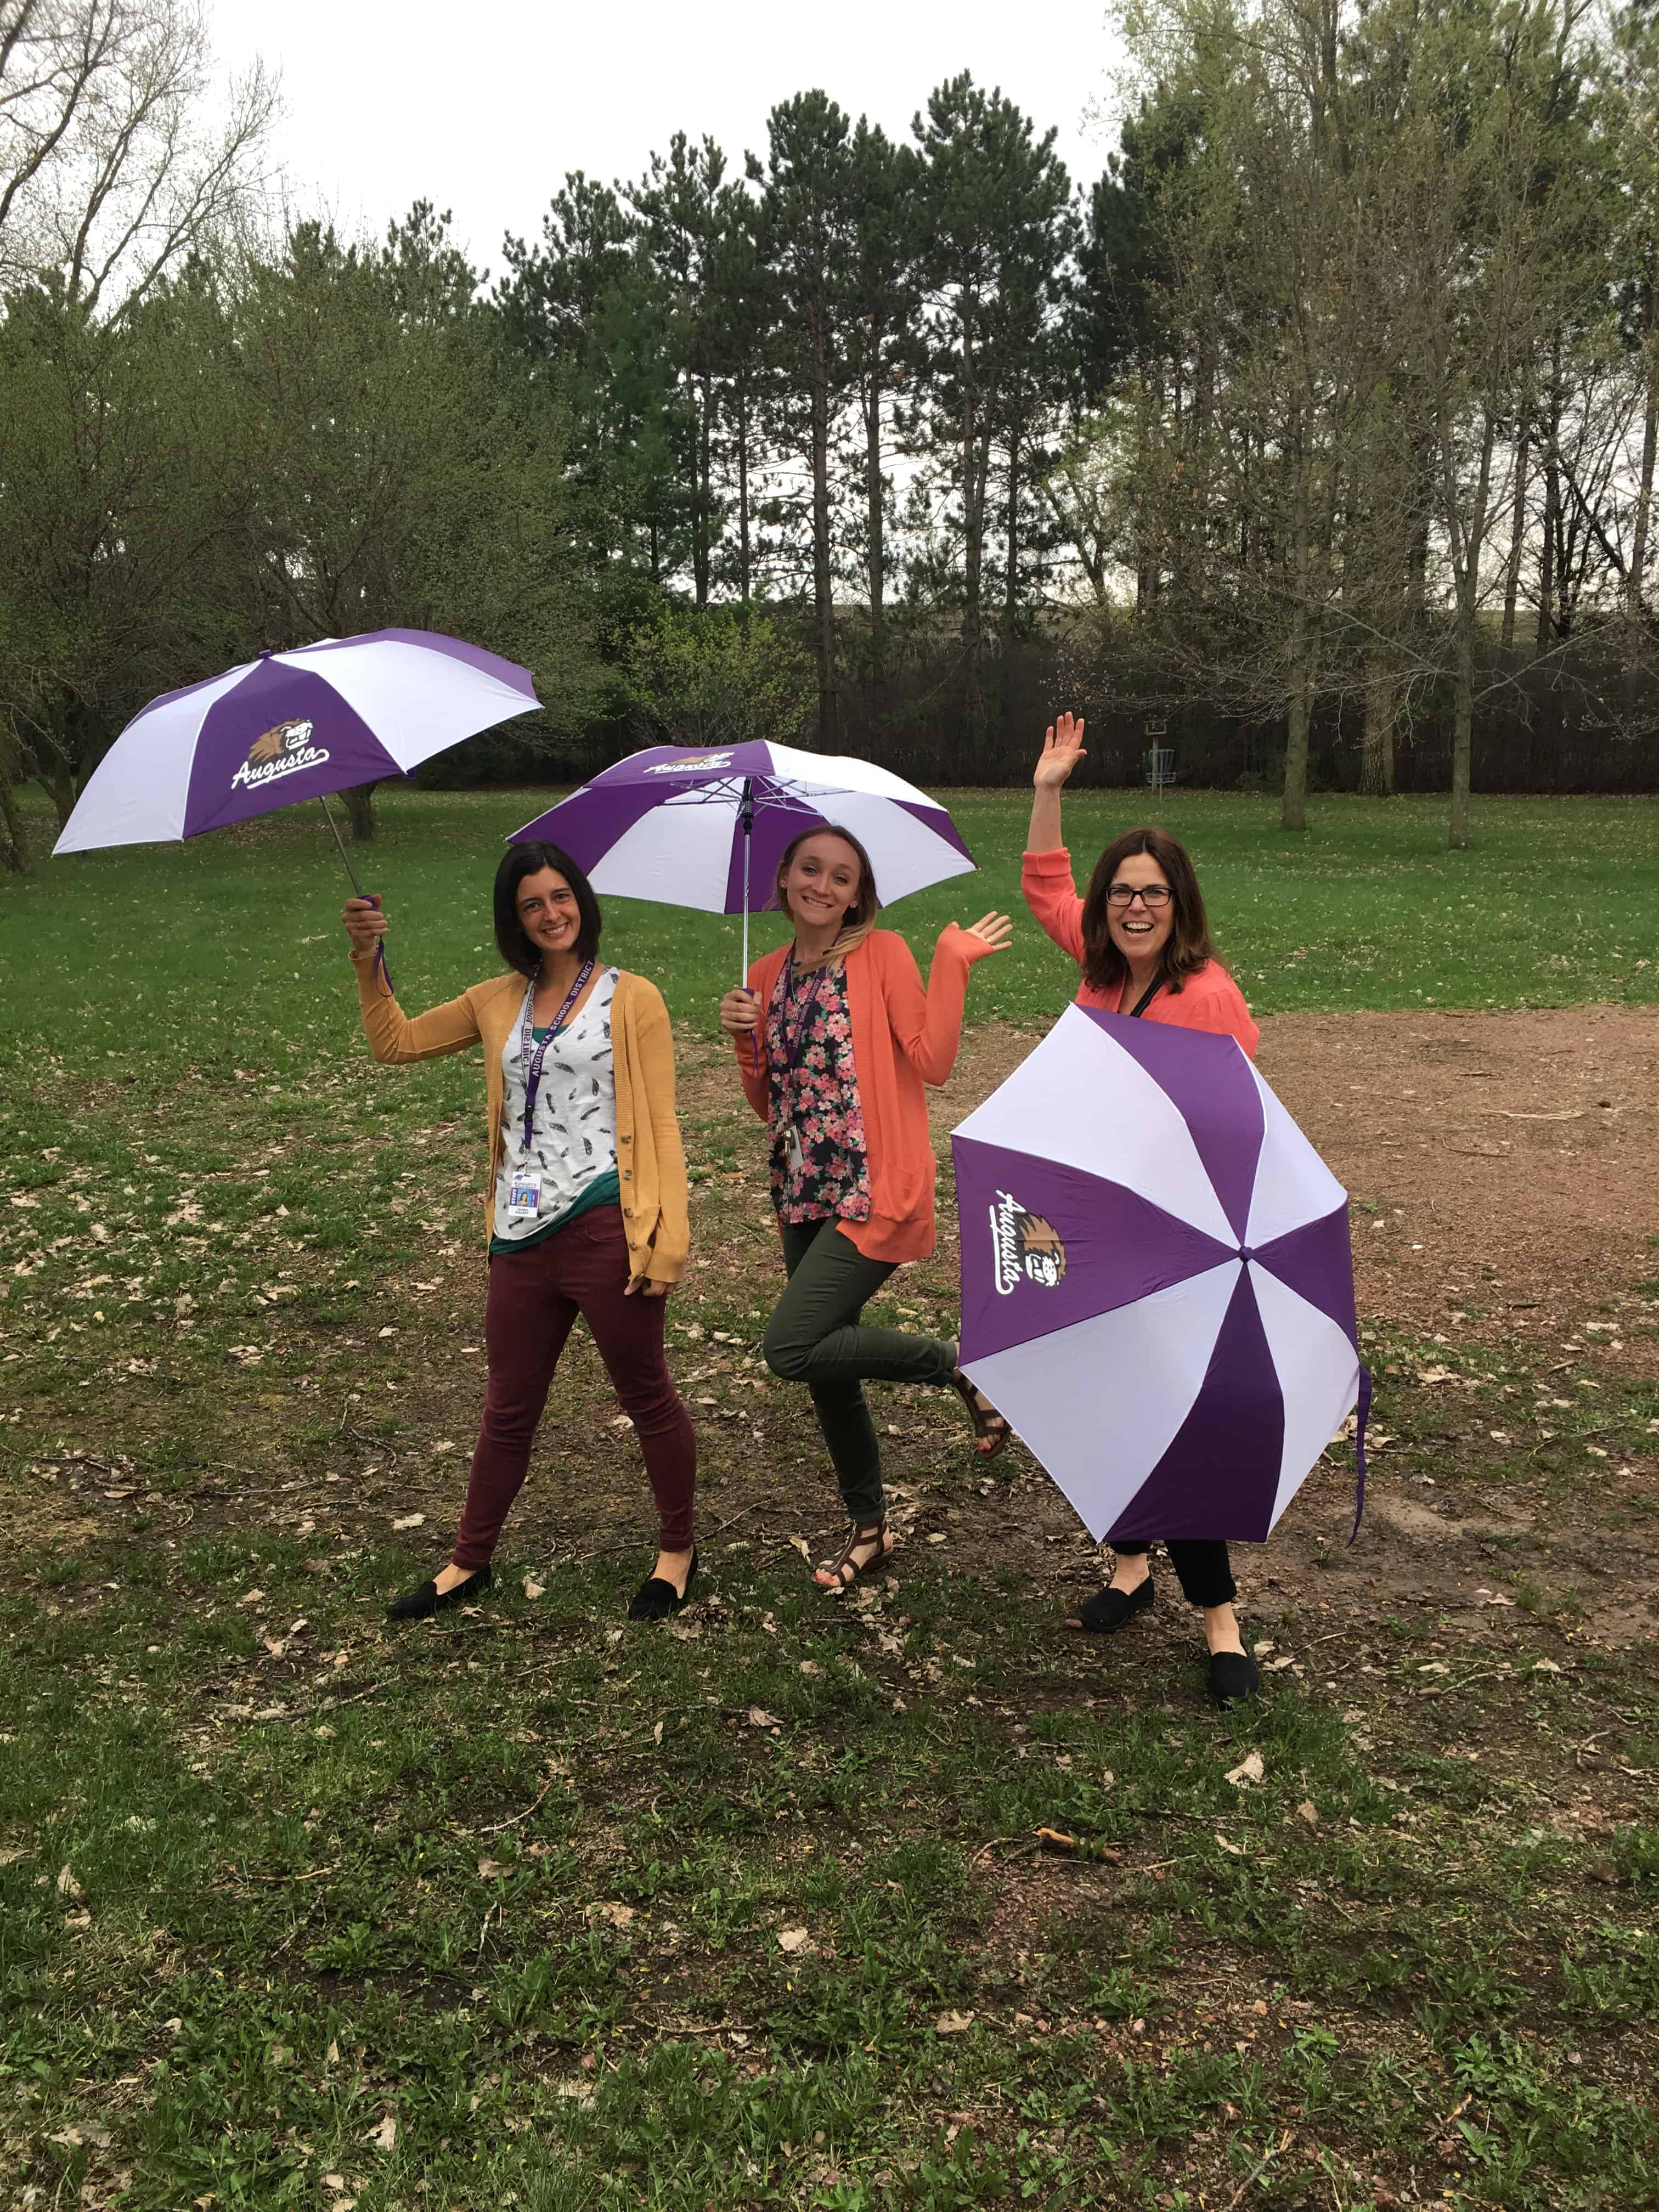 Three staff members laughing and posing outside with their white and purple umbrellas